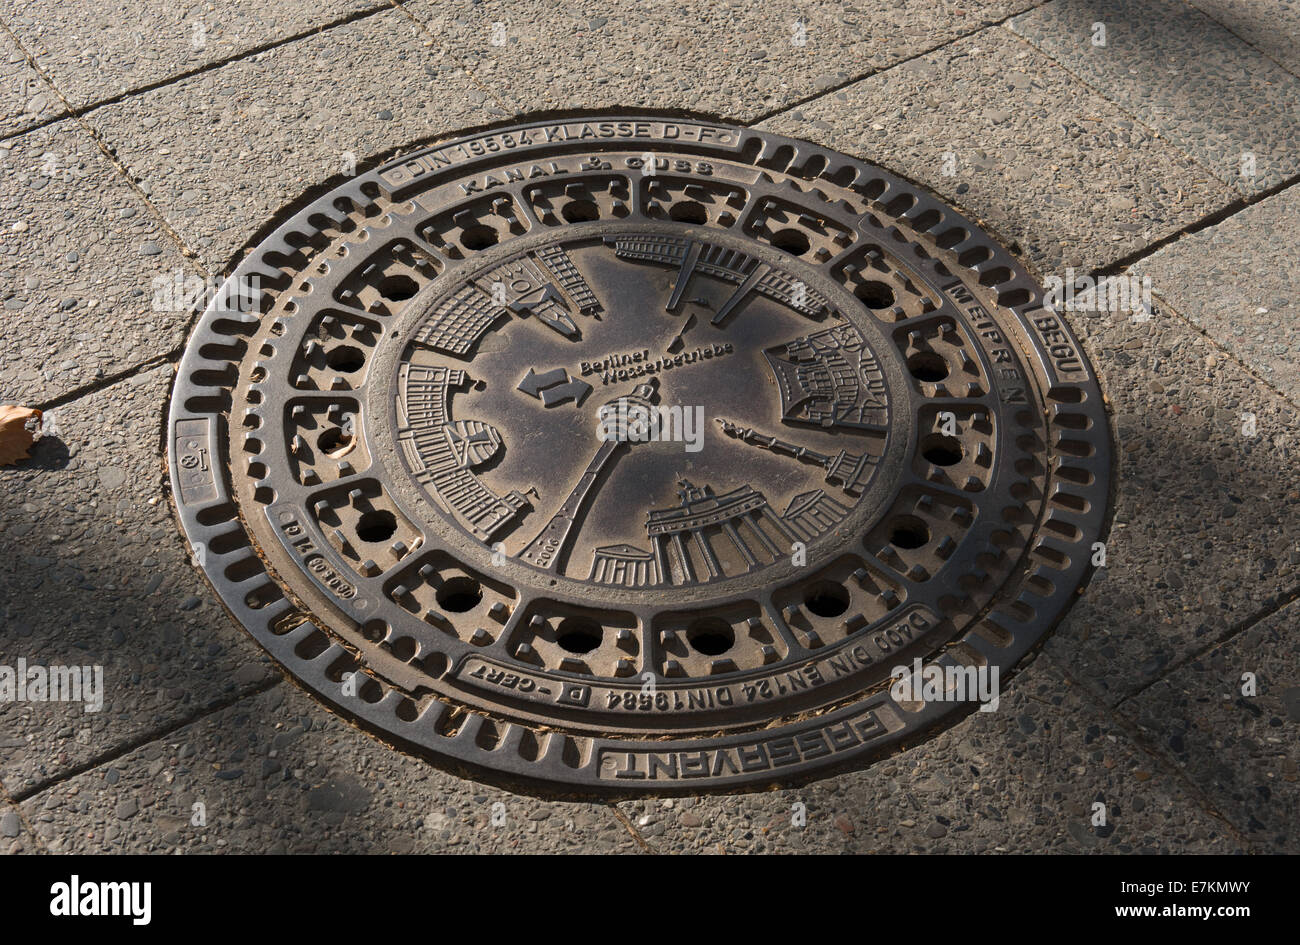 A man hole cover in the pavement of K damm Berlin. it shows some of the most famous sights in Berlin. Stock Photo